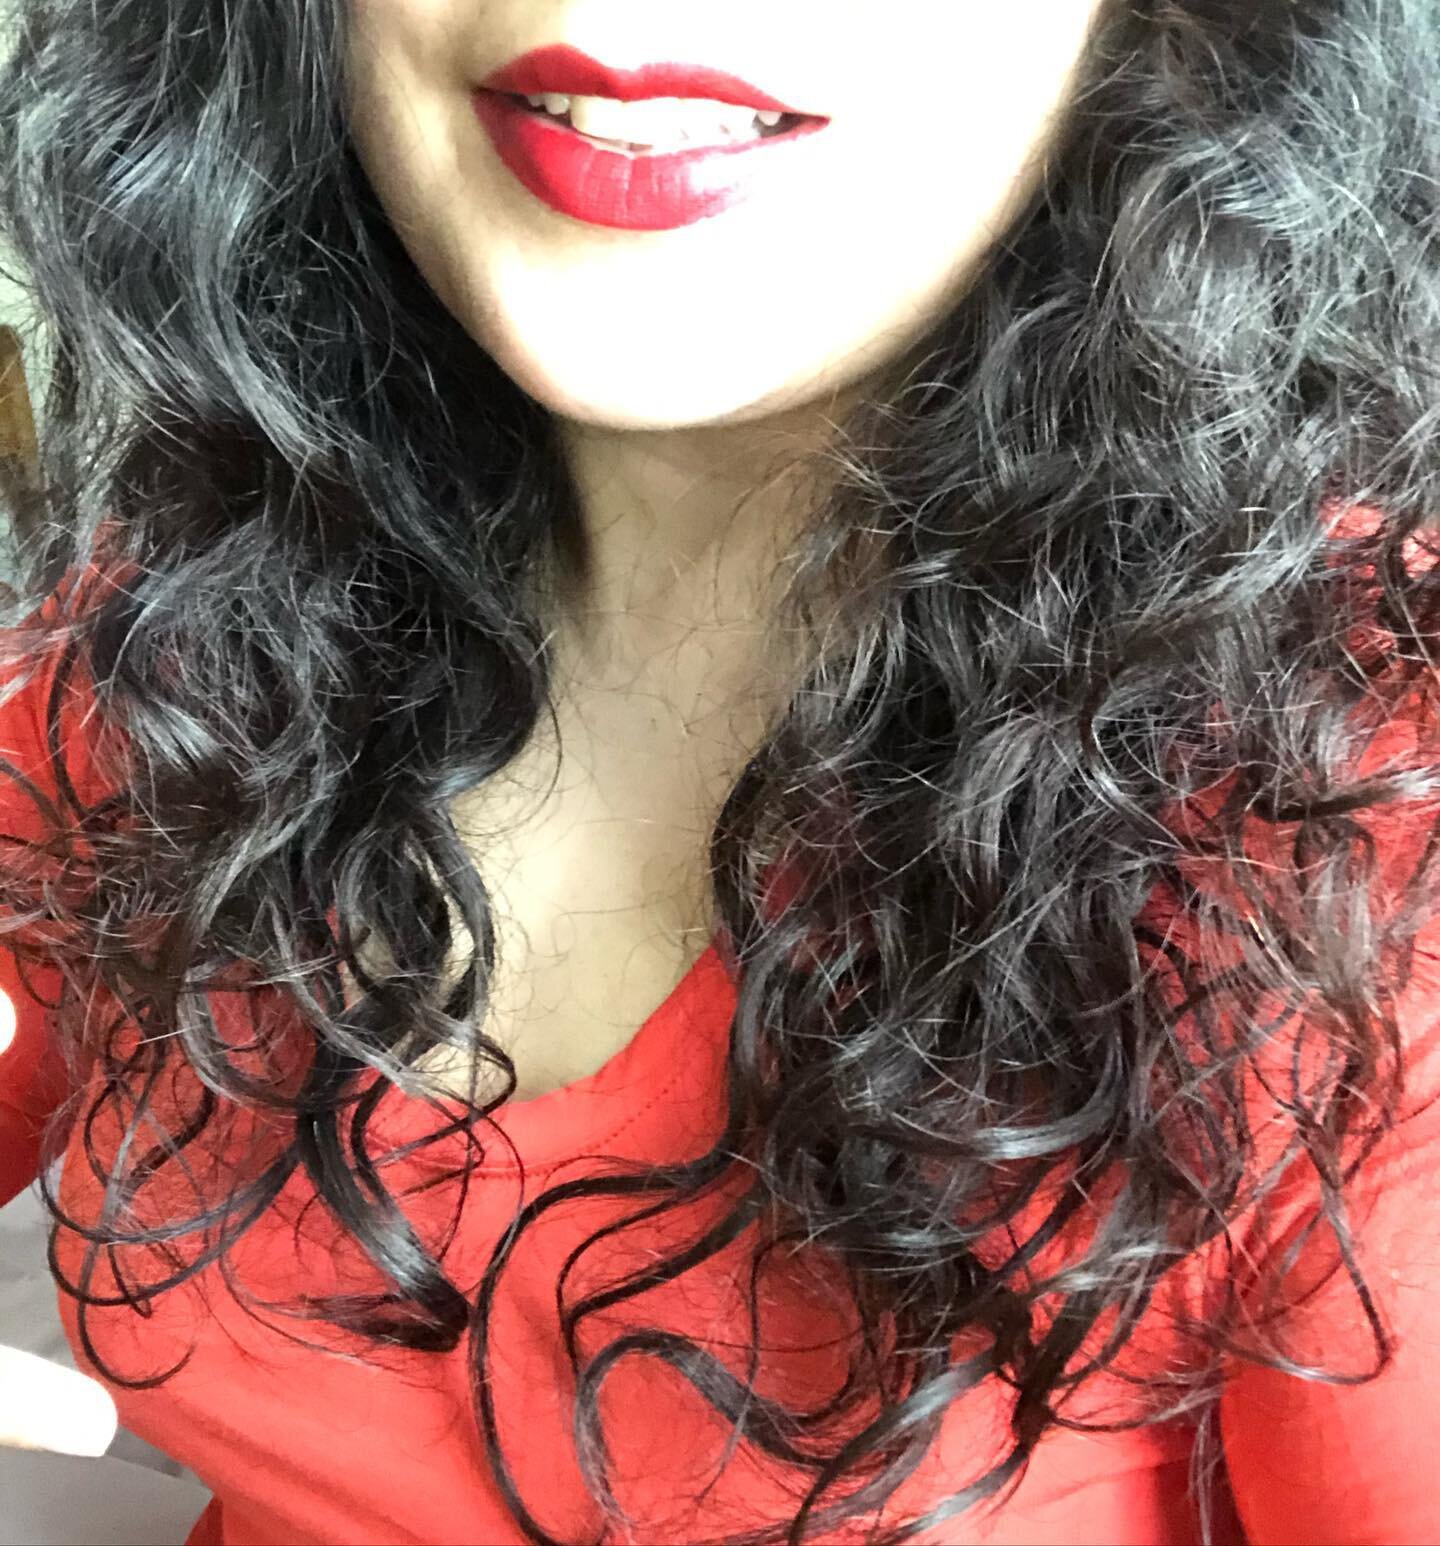 Happy Canada Day! 🇨🇦 ☀️ 
I finally started to embrace my natural curls - after having to go most of my life without knowing how to take care of them or killing them with straighteners and blow drying. Curly Sana is back, baby!
.
.
.
.
#curlyhair #c